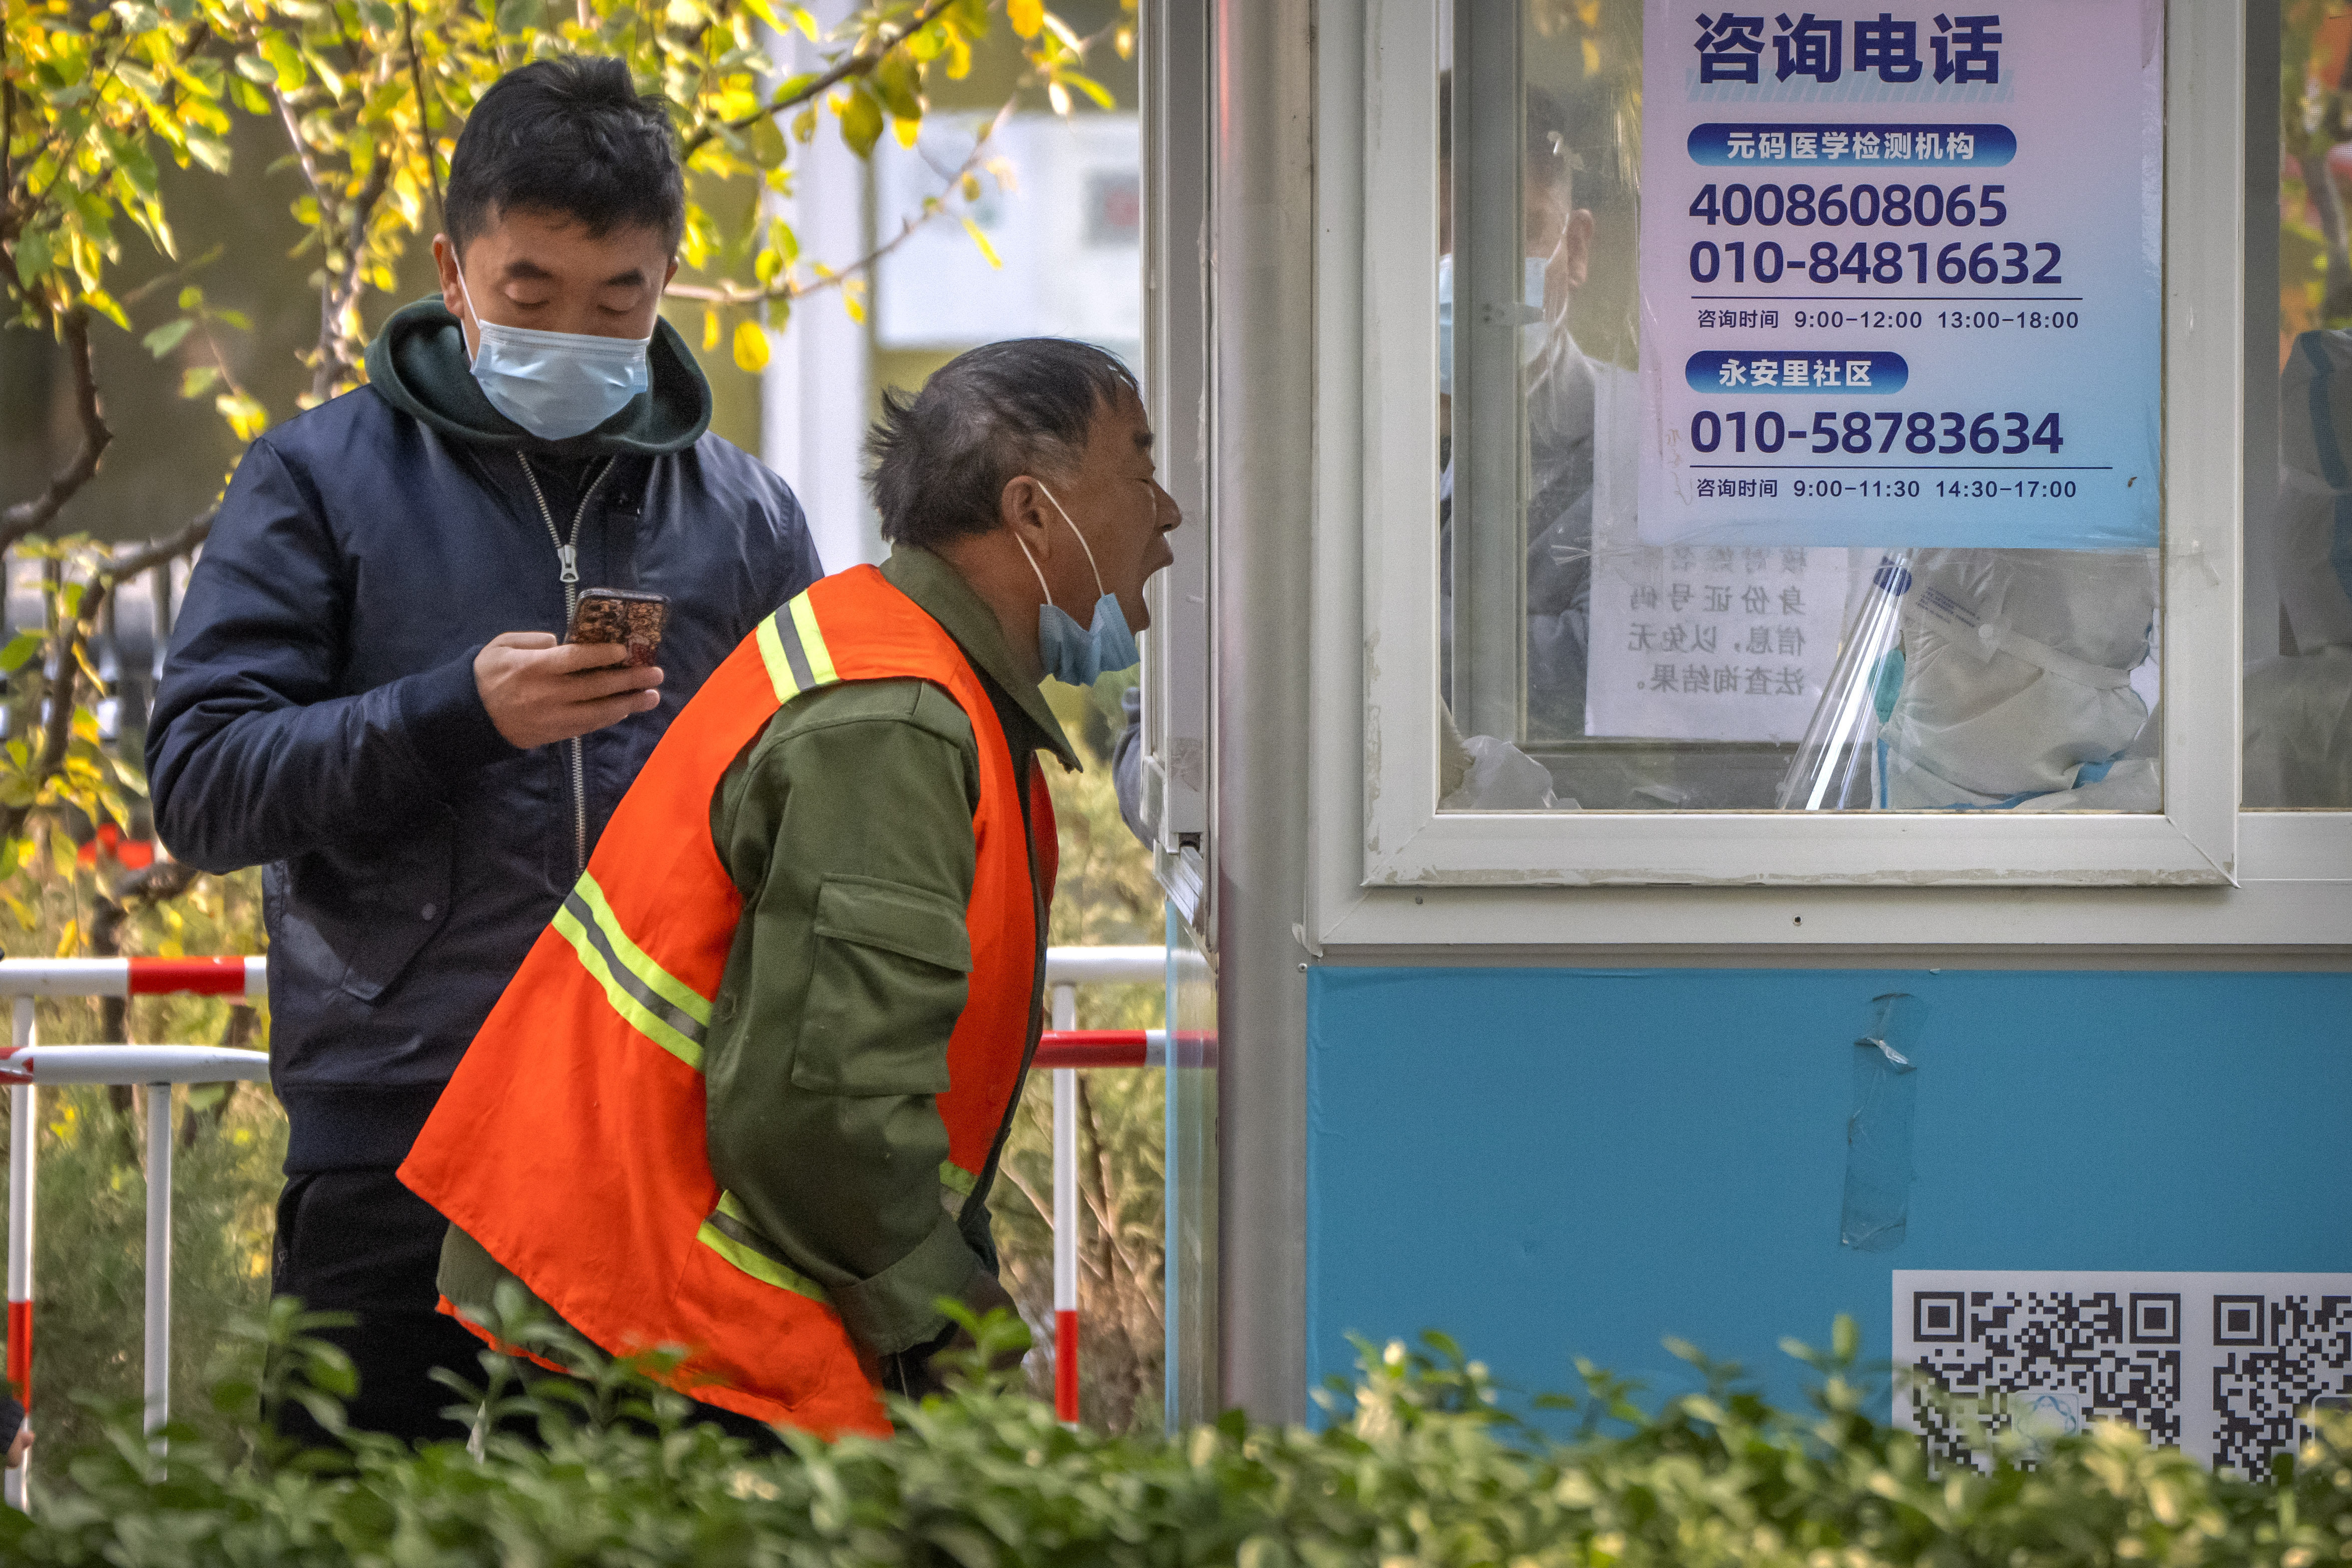 China Eases Some Quarantine for Travelers Even as Cases Rise